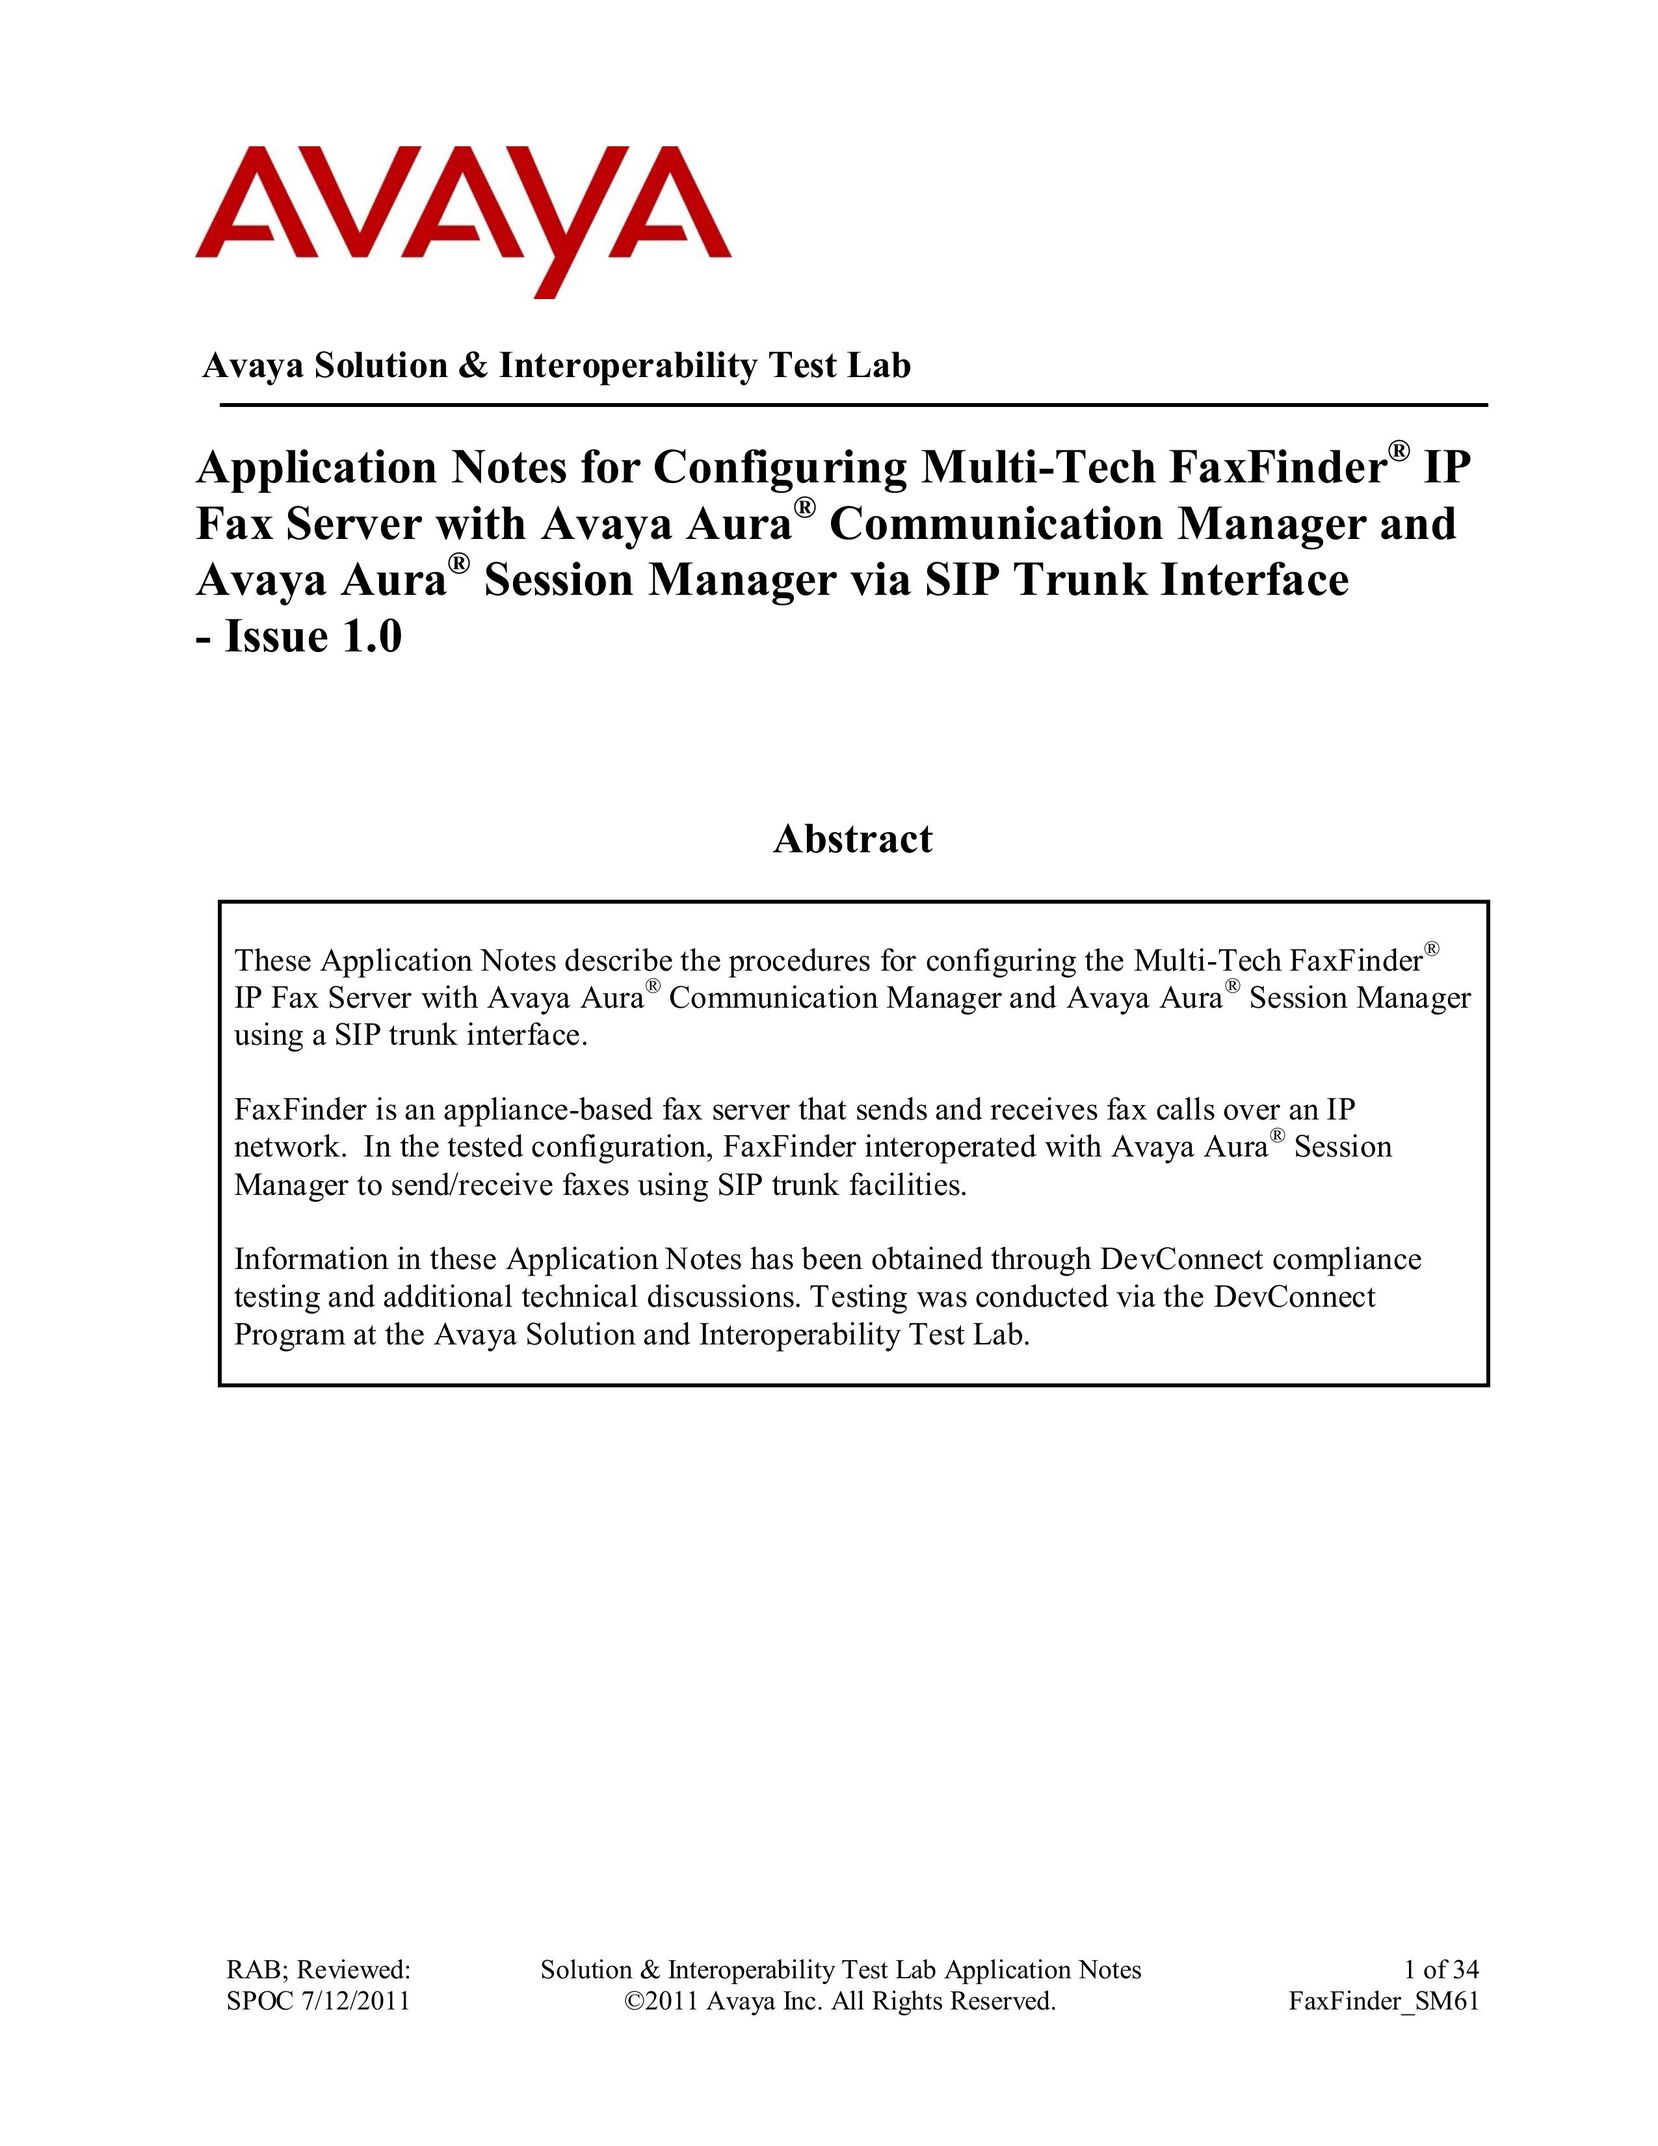 Avaya SM61 All in One Printer User Manual (Page 1)